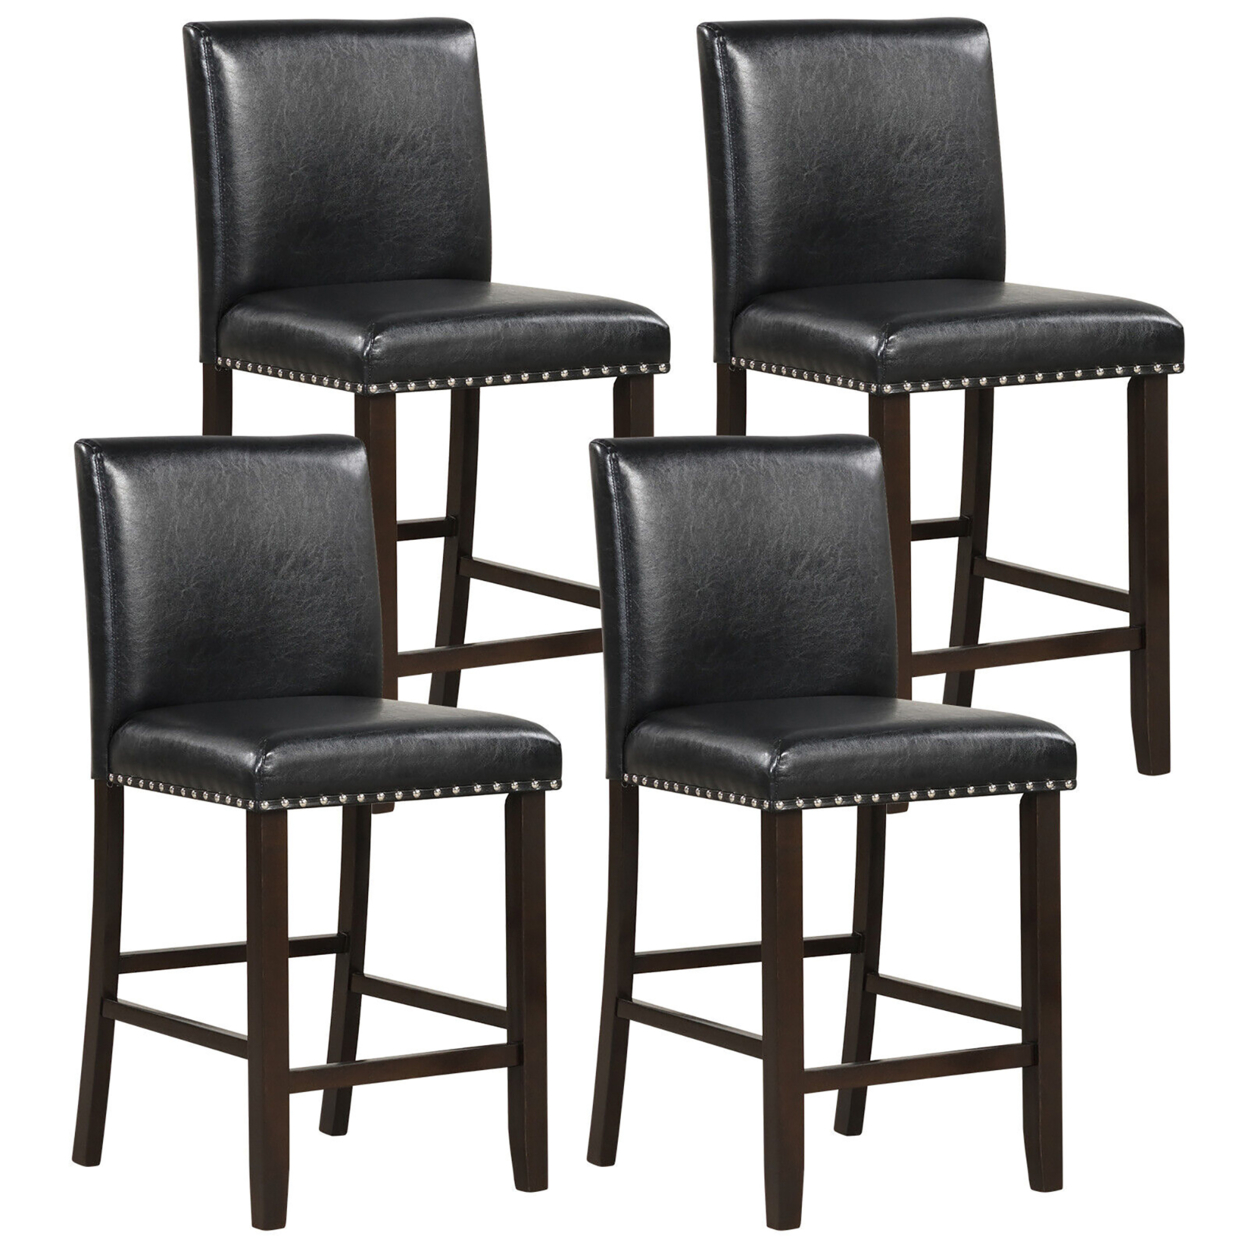 Set Of 4 Bar Stools PVC Leather Counter Height Chairs For Kitchen Island Black